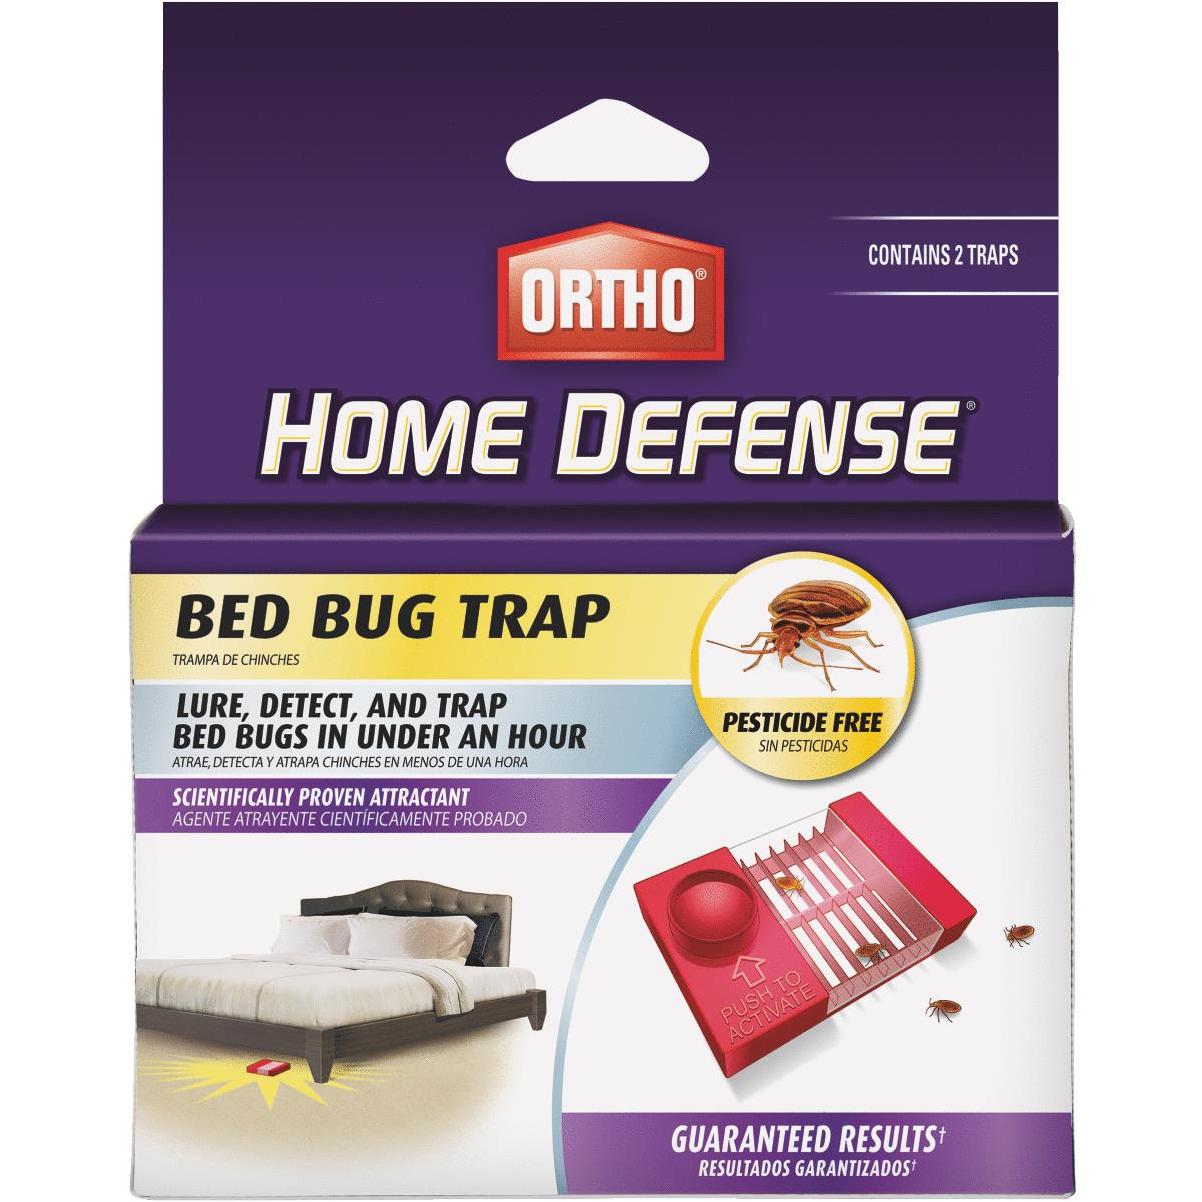 Hot Shot Bed Bug Glue Trap Detector Indoor Insect Trap (4-Pack)